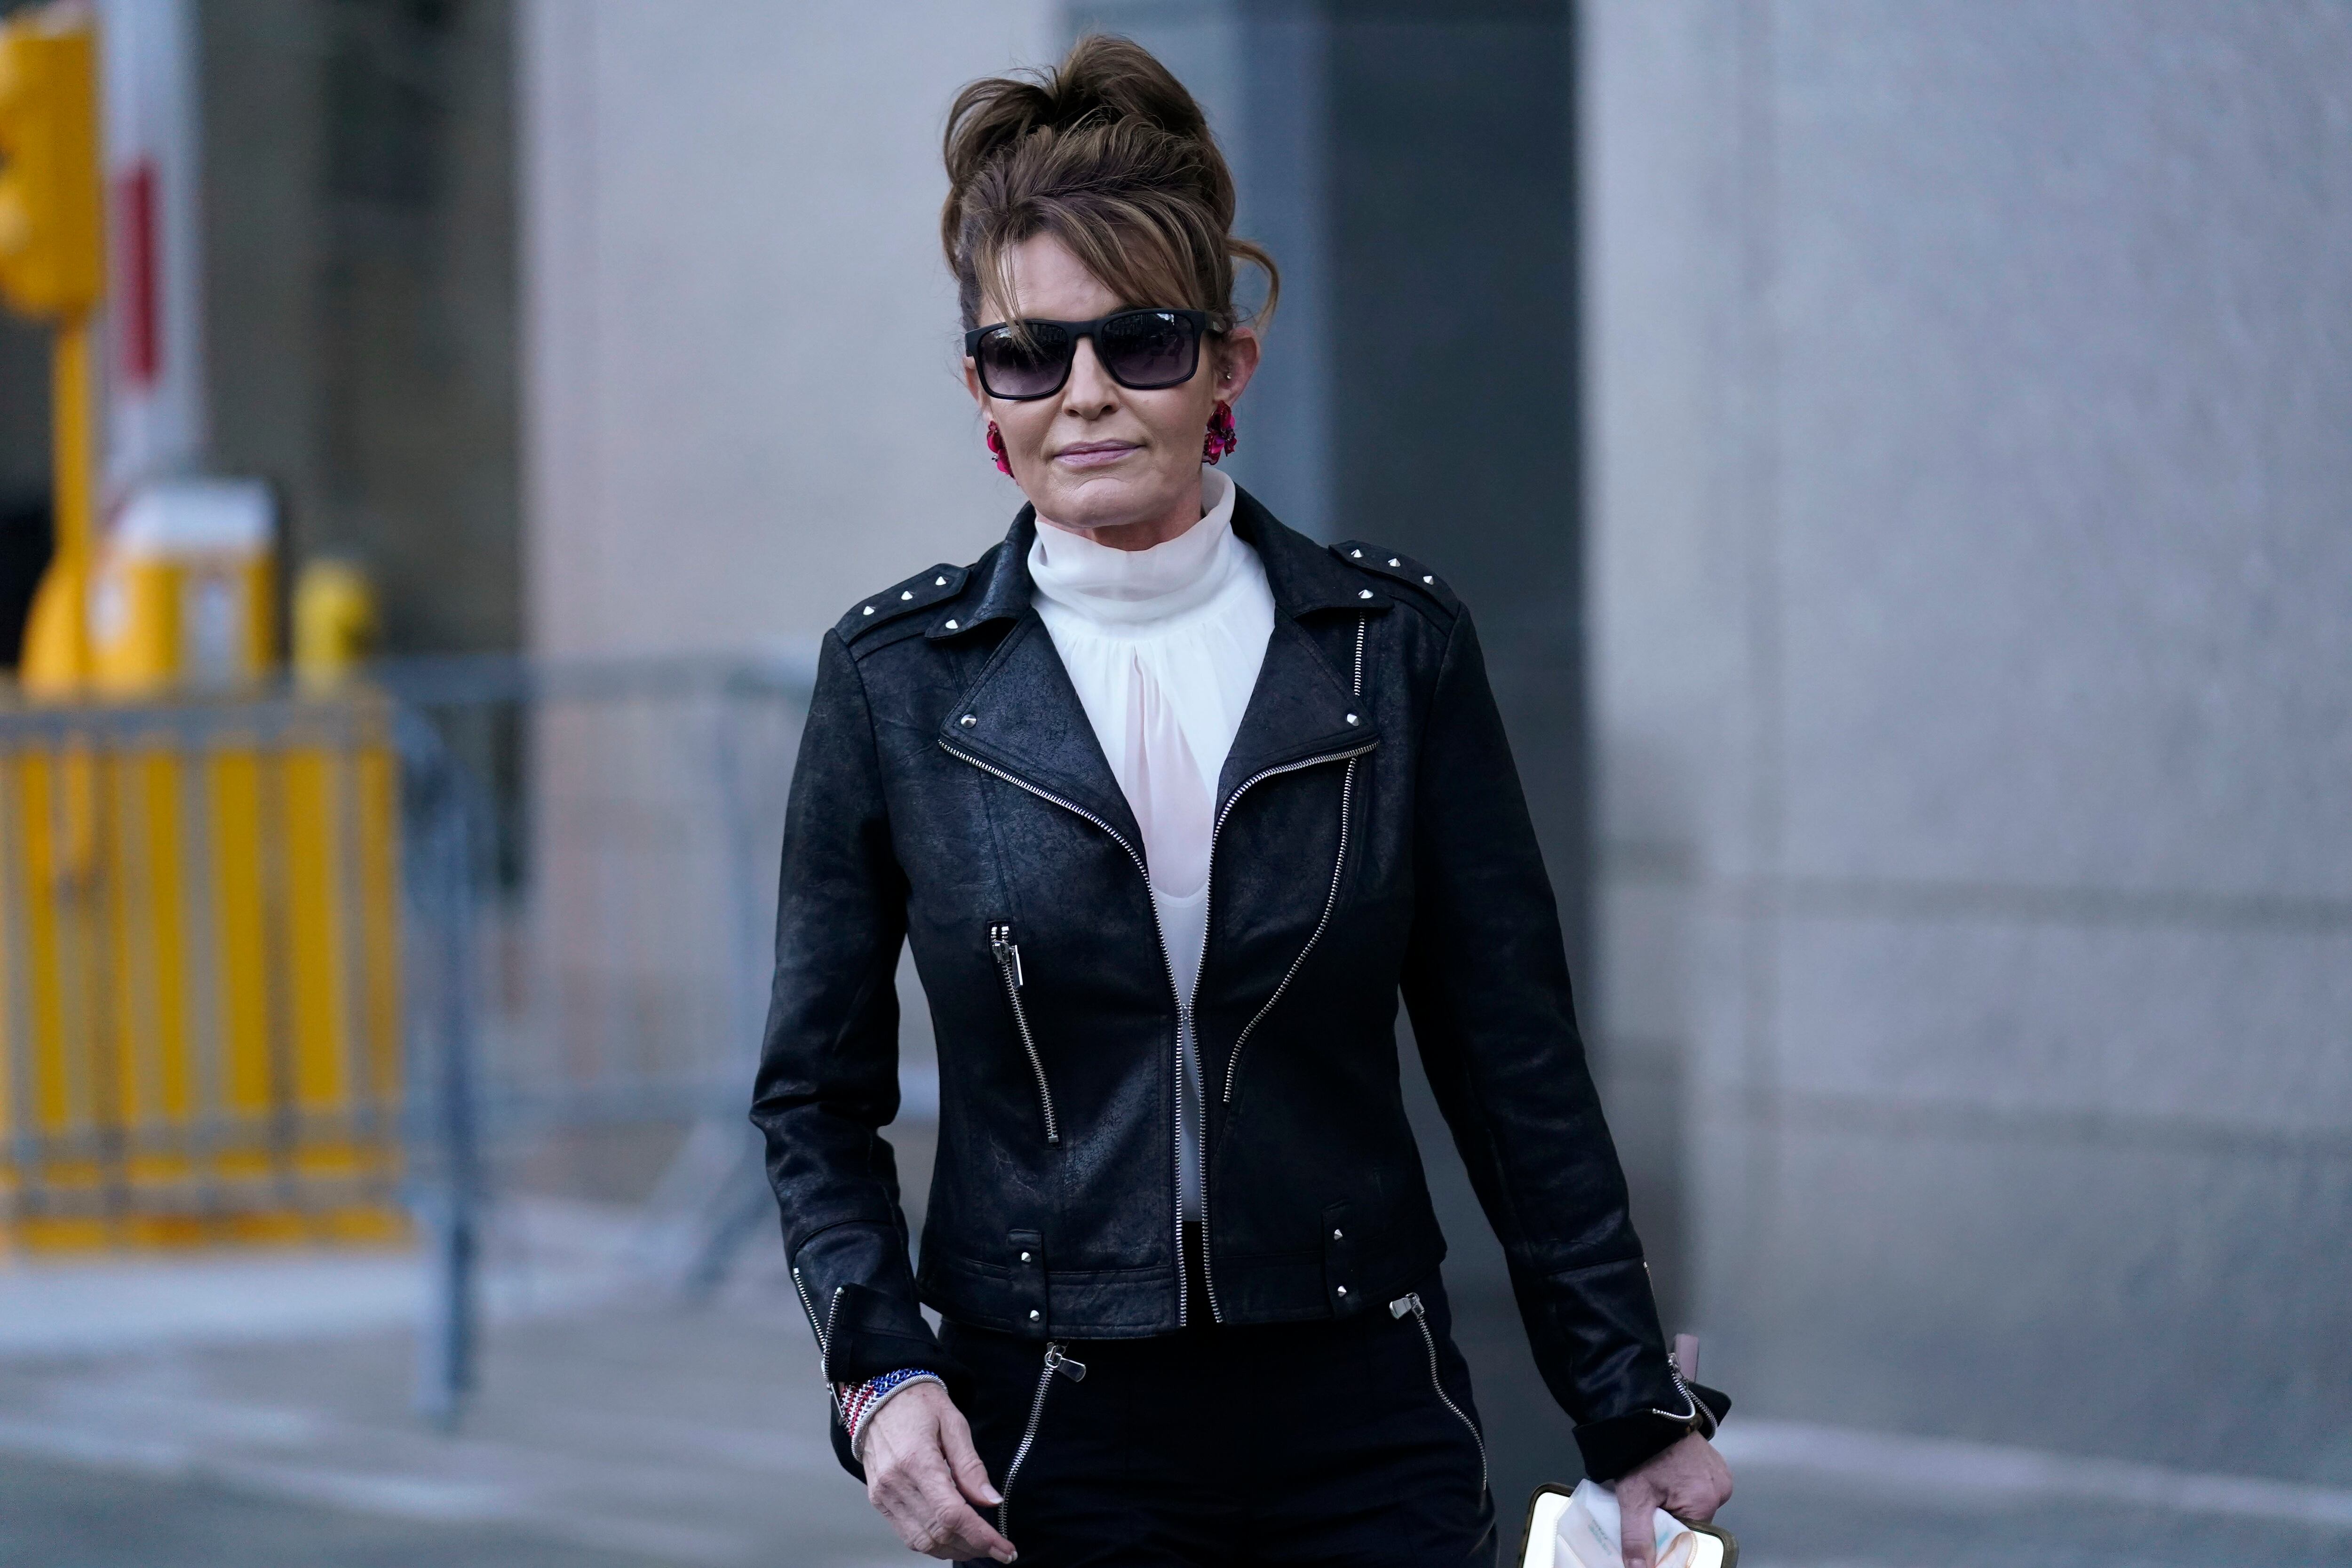 Jury rejects Sarah Palin’s lawsuit against New York Times